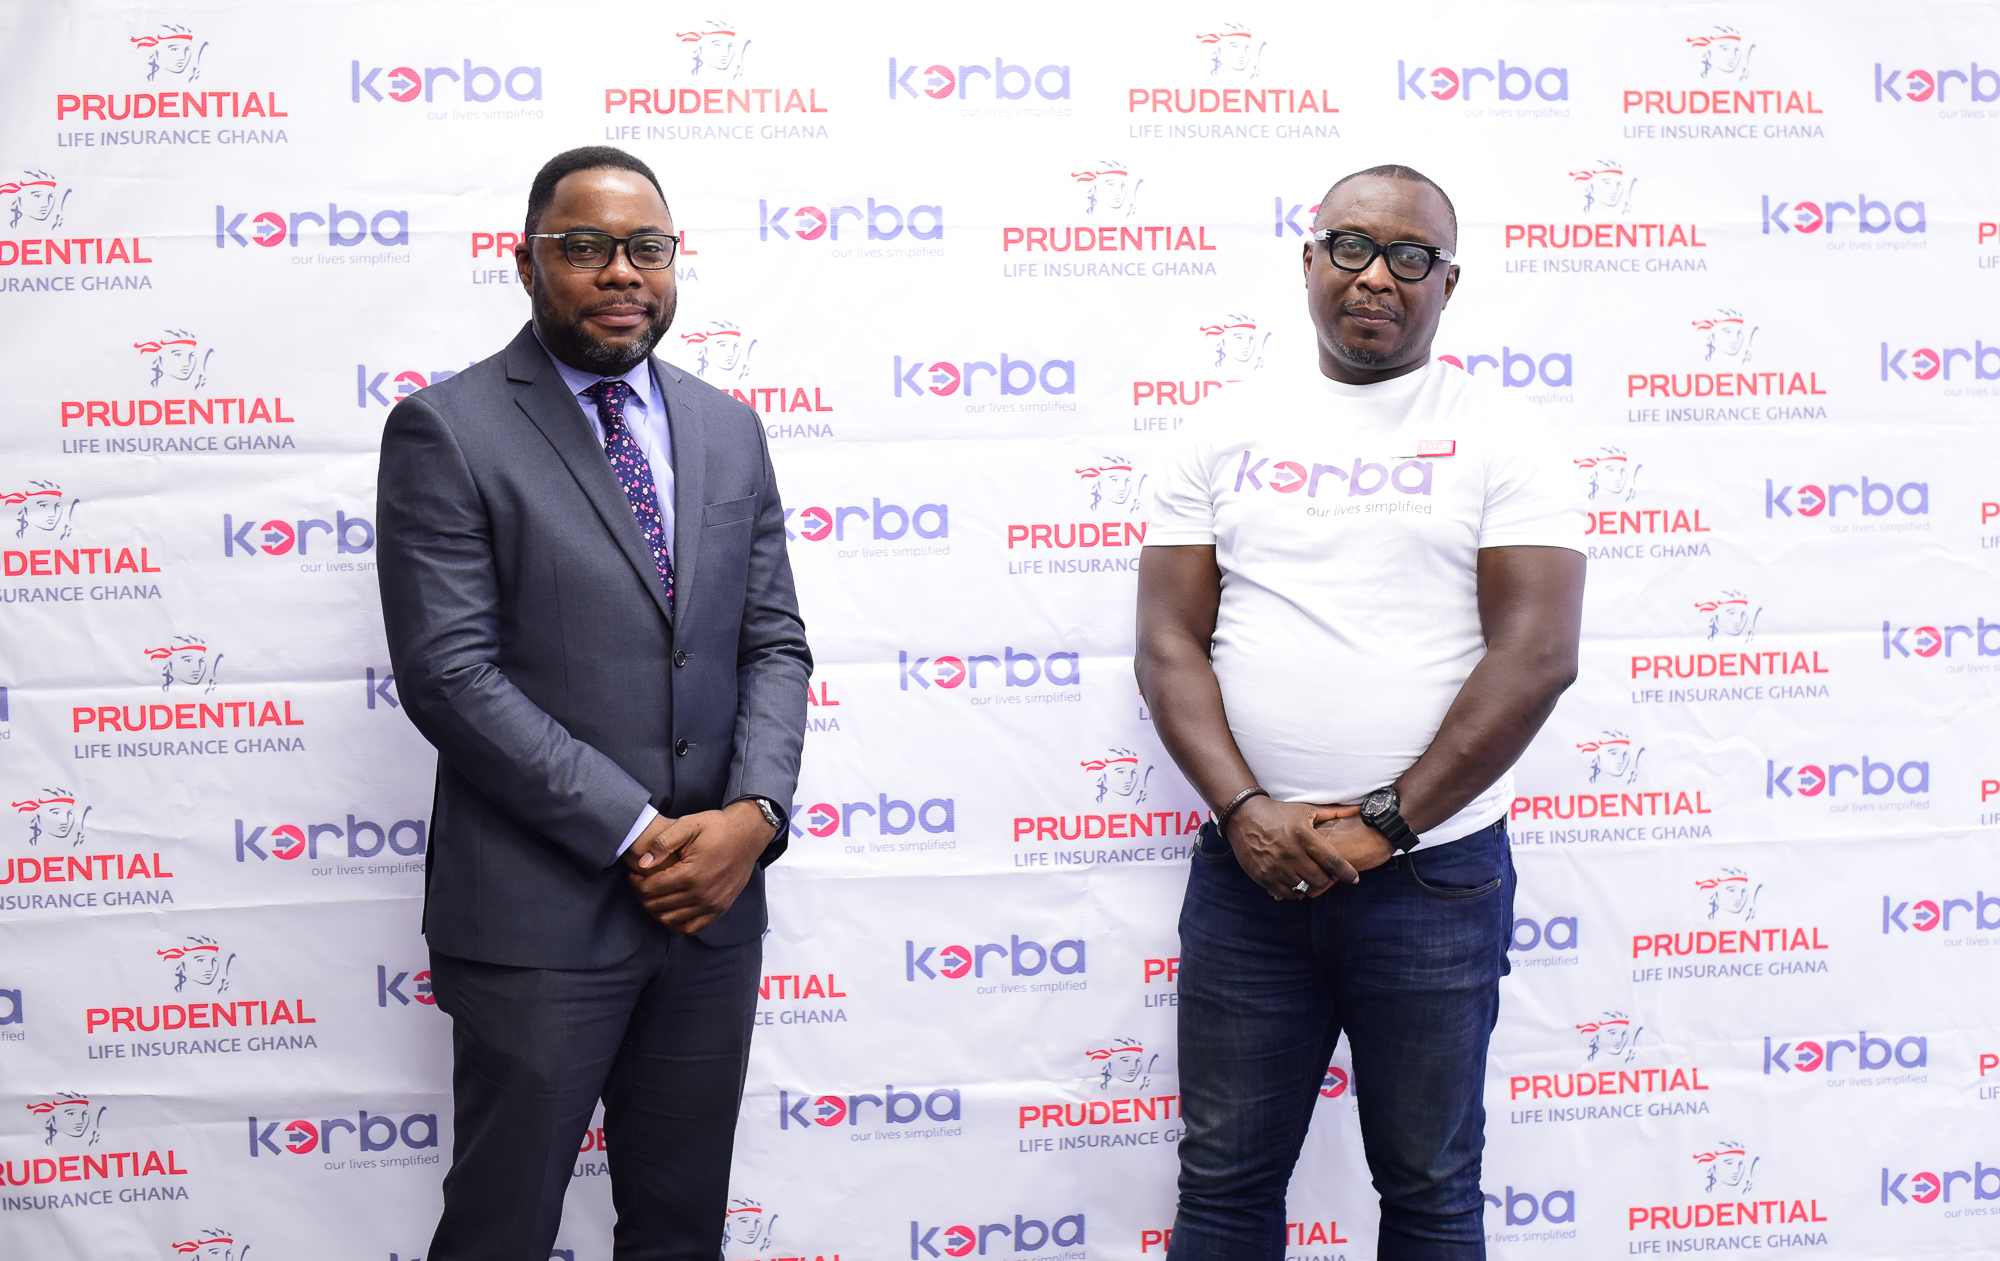 Korba announces partnership with Prudential Life to provide insurance cover for its customers